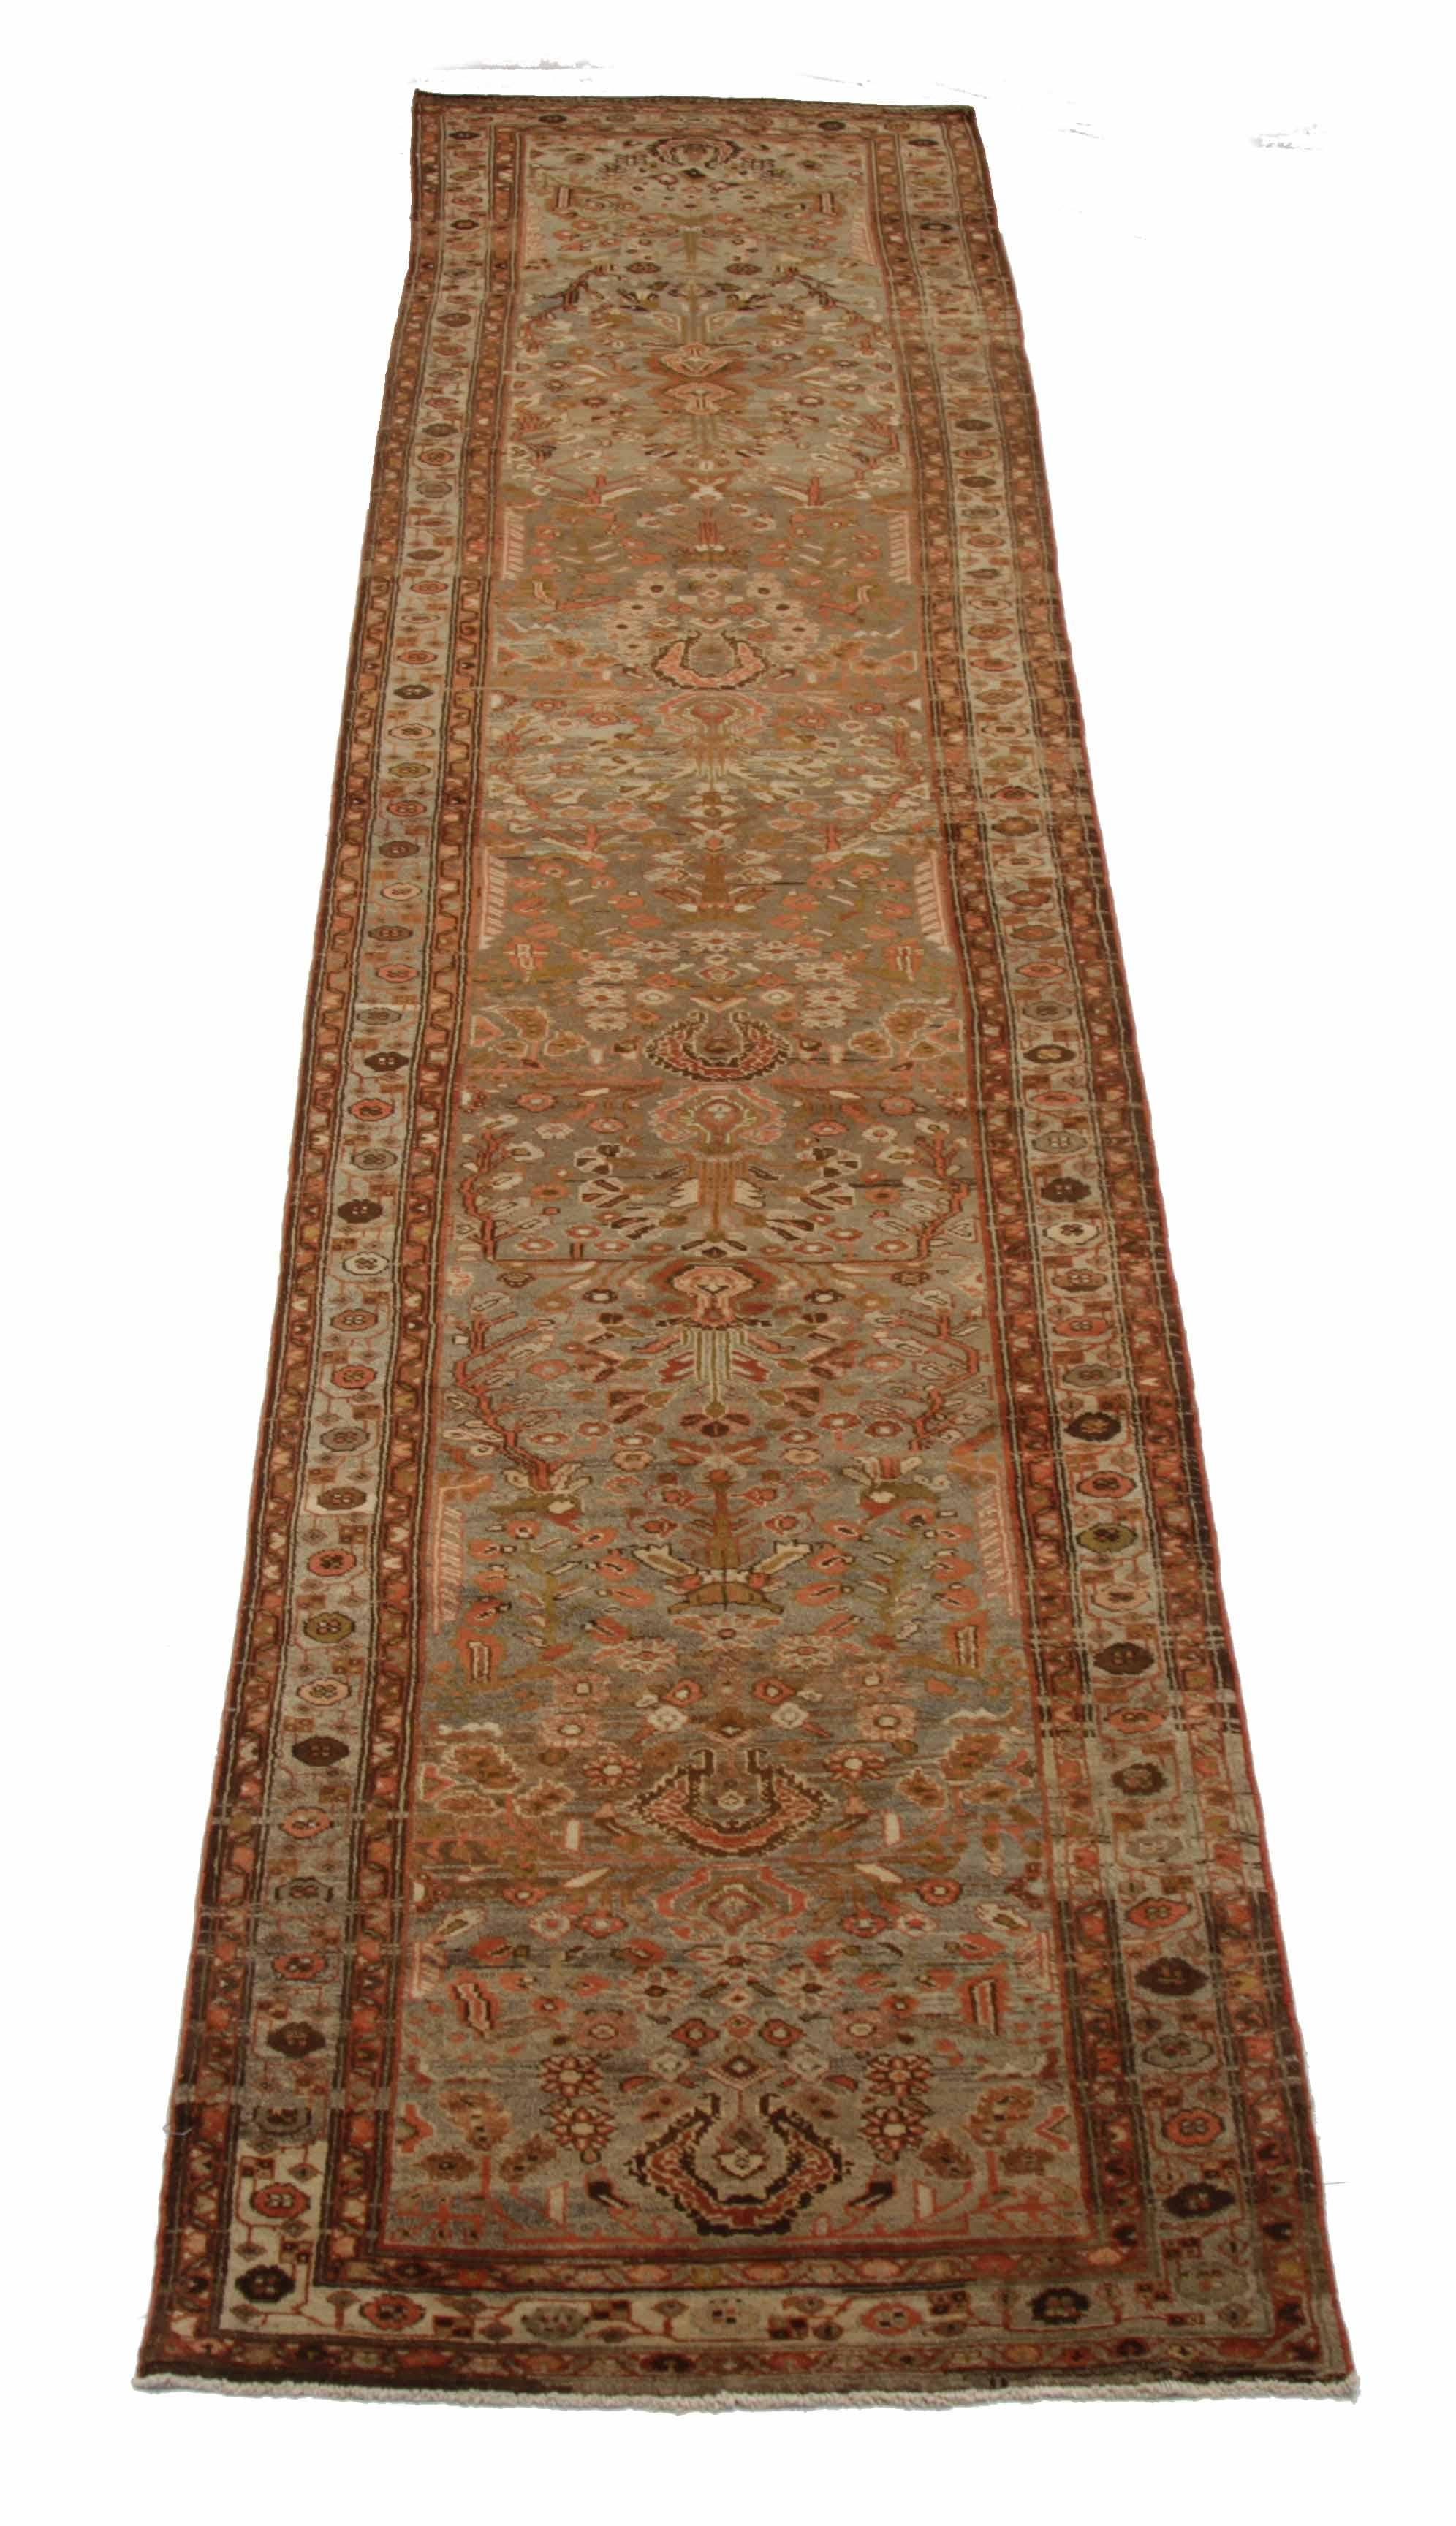 Antique Persian runner rug handwoven from the finest sheep’s wool. It’s colored with all-natural vegetable dyes that are safe for humans and pets. It’s a traditional Malayer design featuring botanical details on an ivory field. It’s a lovely piece